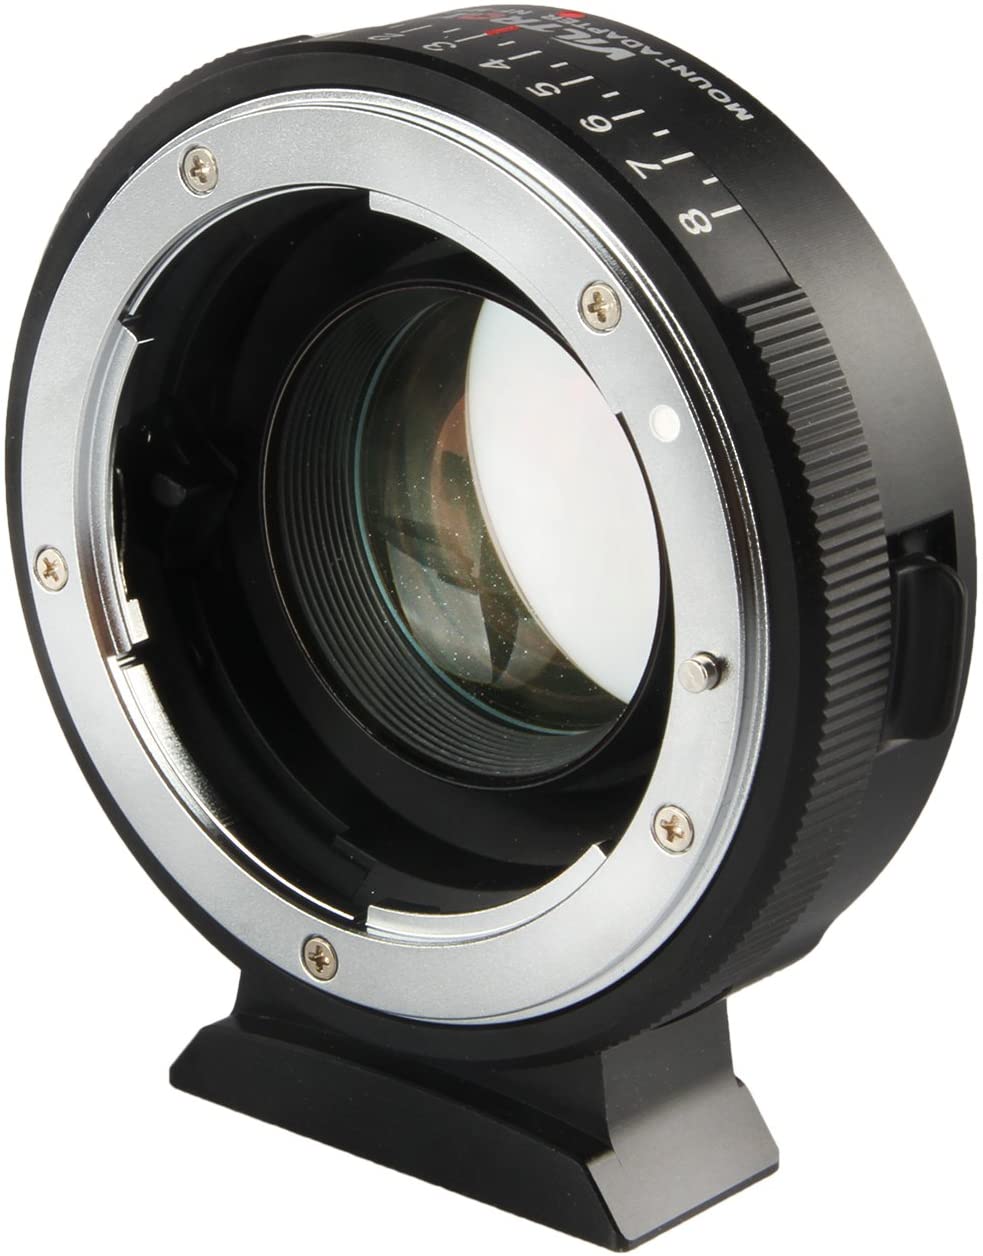 Адаптер VILTROX NF-M43X Lens Mount Adapter for Nikon F-Mount, D or G-Type Lens to Micro Four Thirds Camera